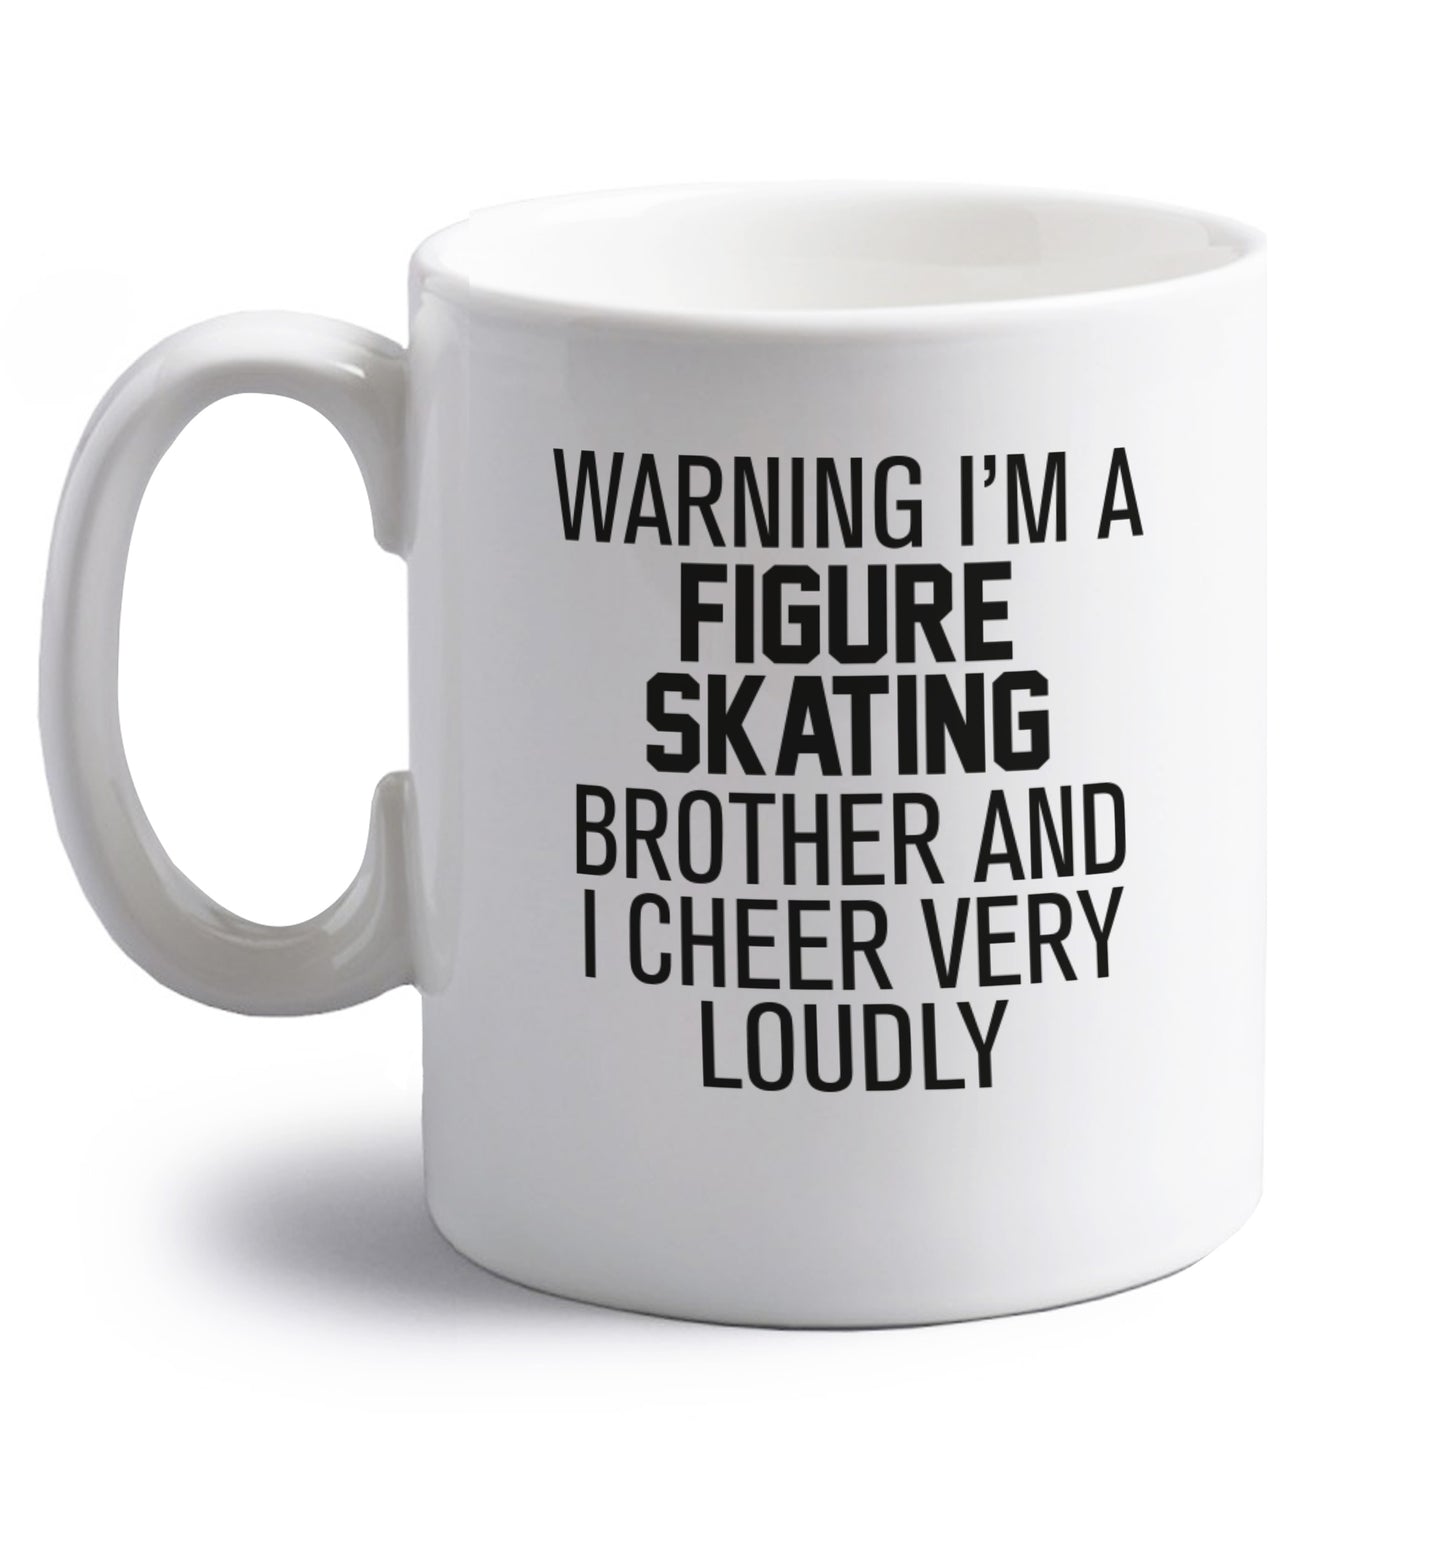 Warning I'm a figure skating brother and I cheer very loudly right handed white ceramic mug 